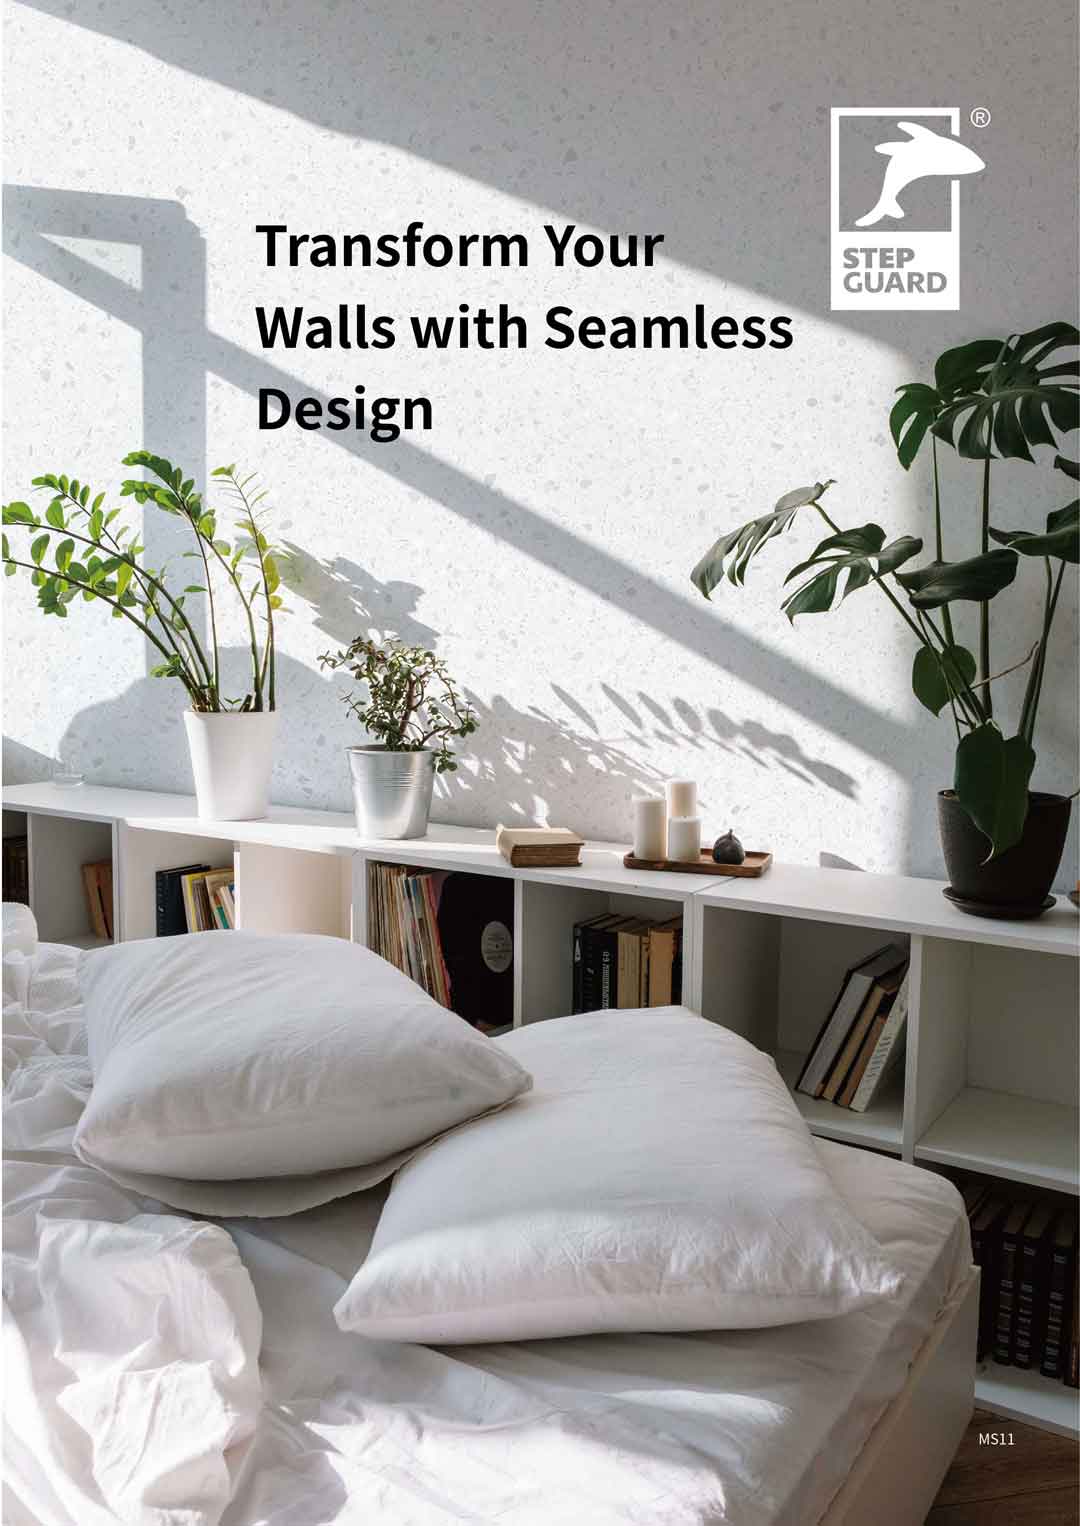 Transform your walls with seamless design